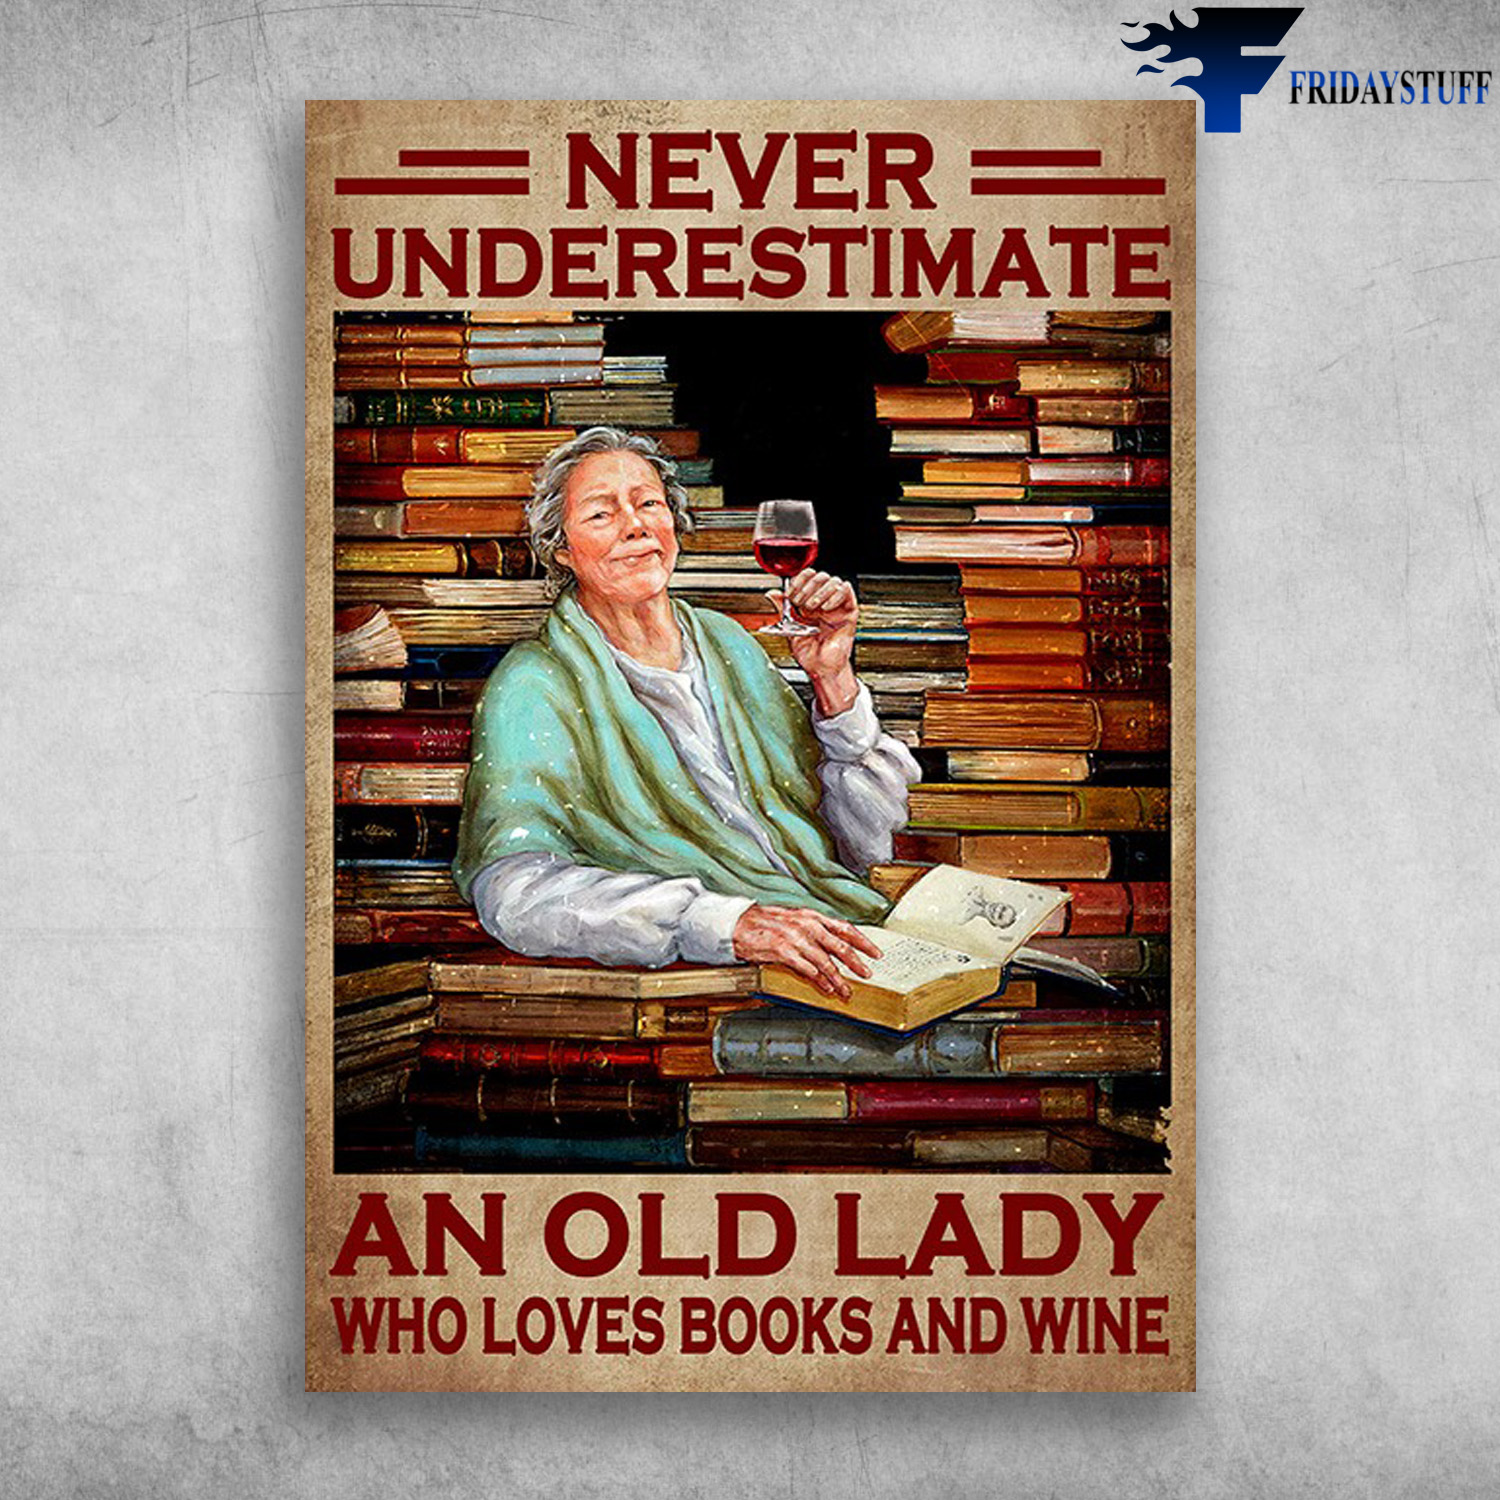 Old Lady Reads Book, Drinks Wine - Never Underestimate And Old Lady, Who Loves Books And Wine